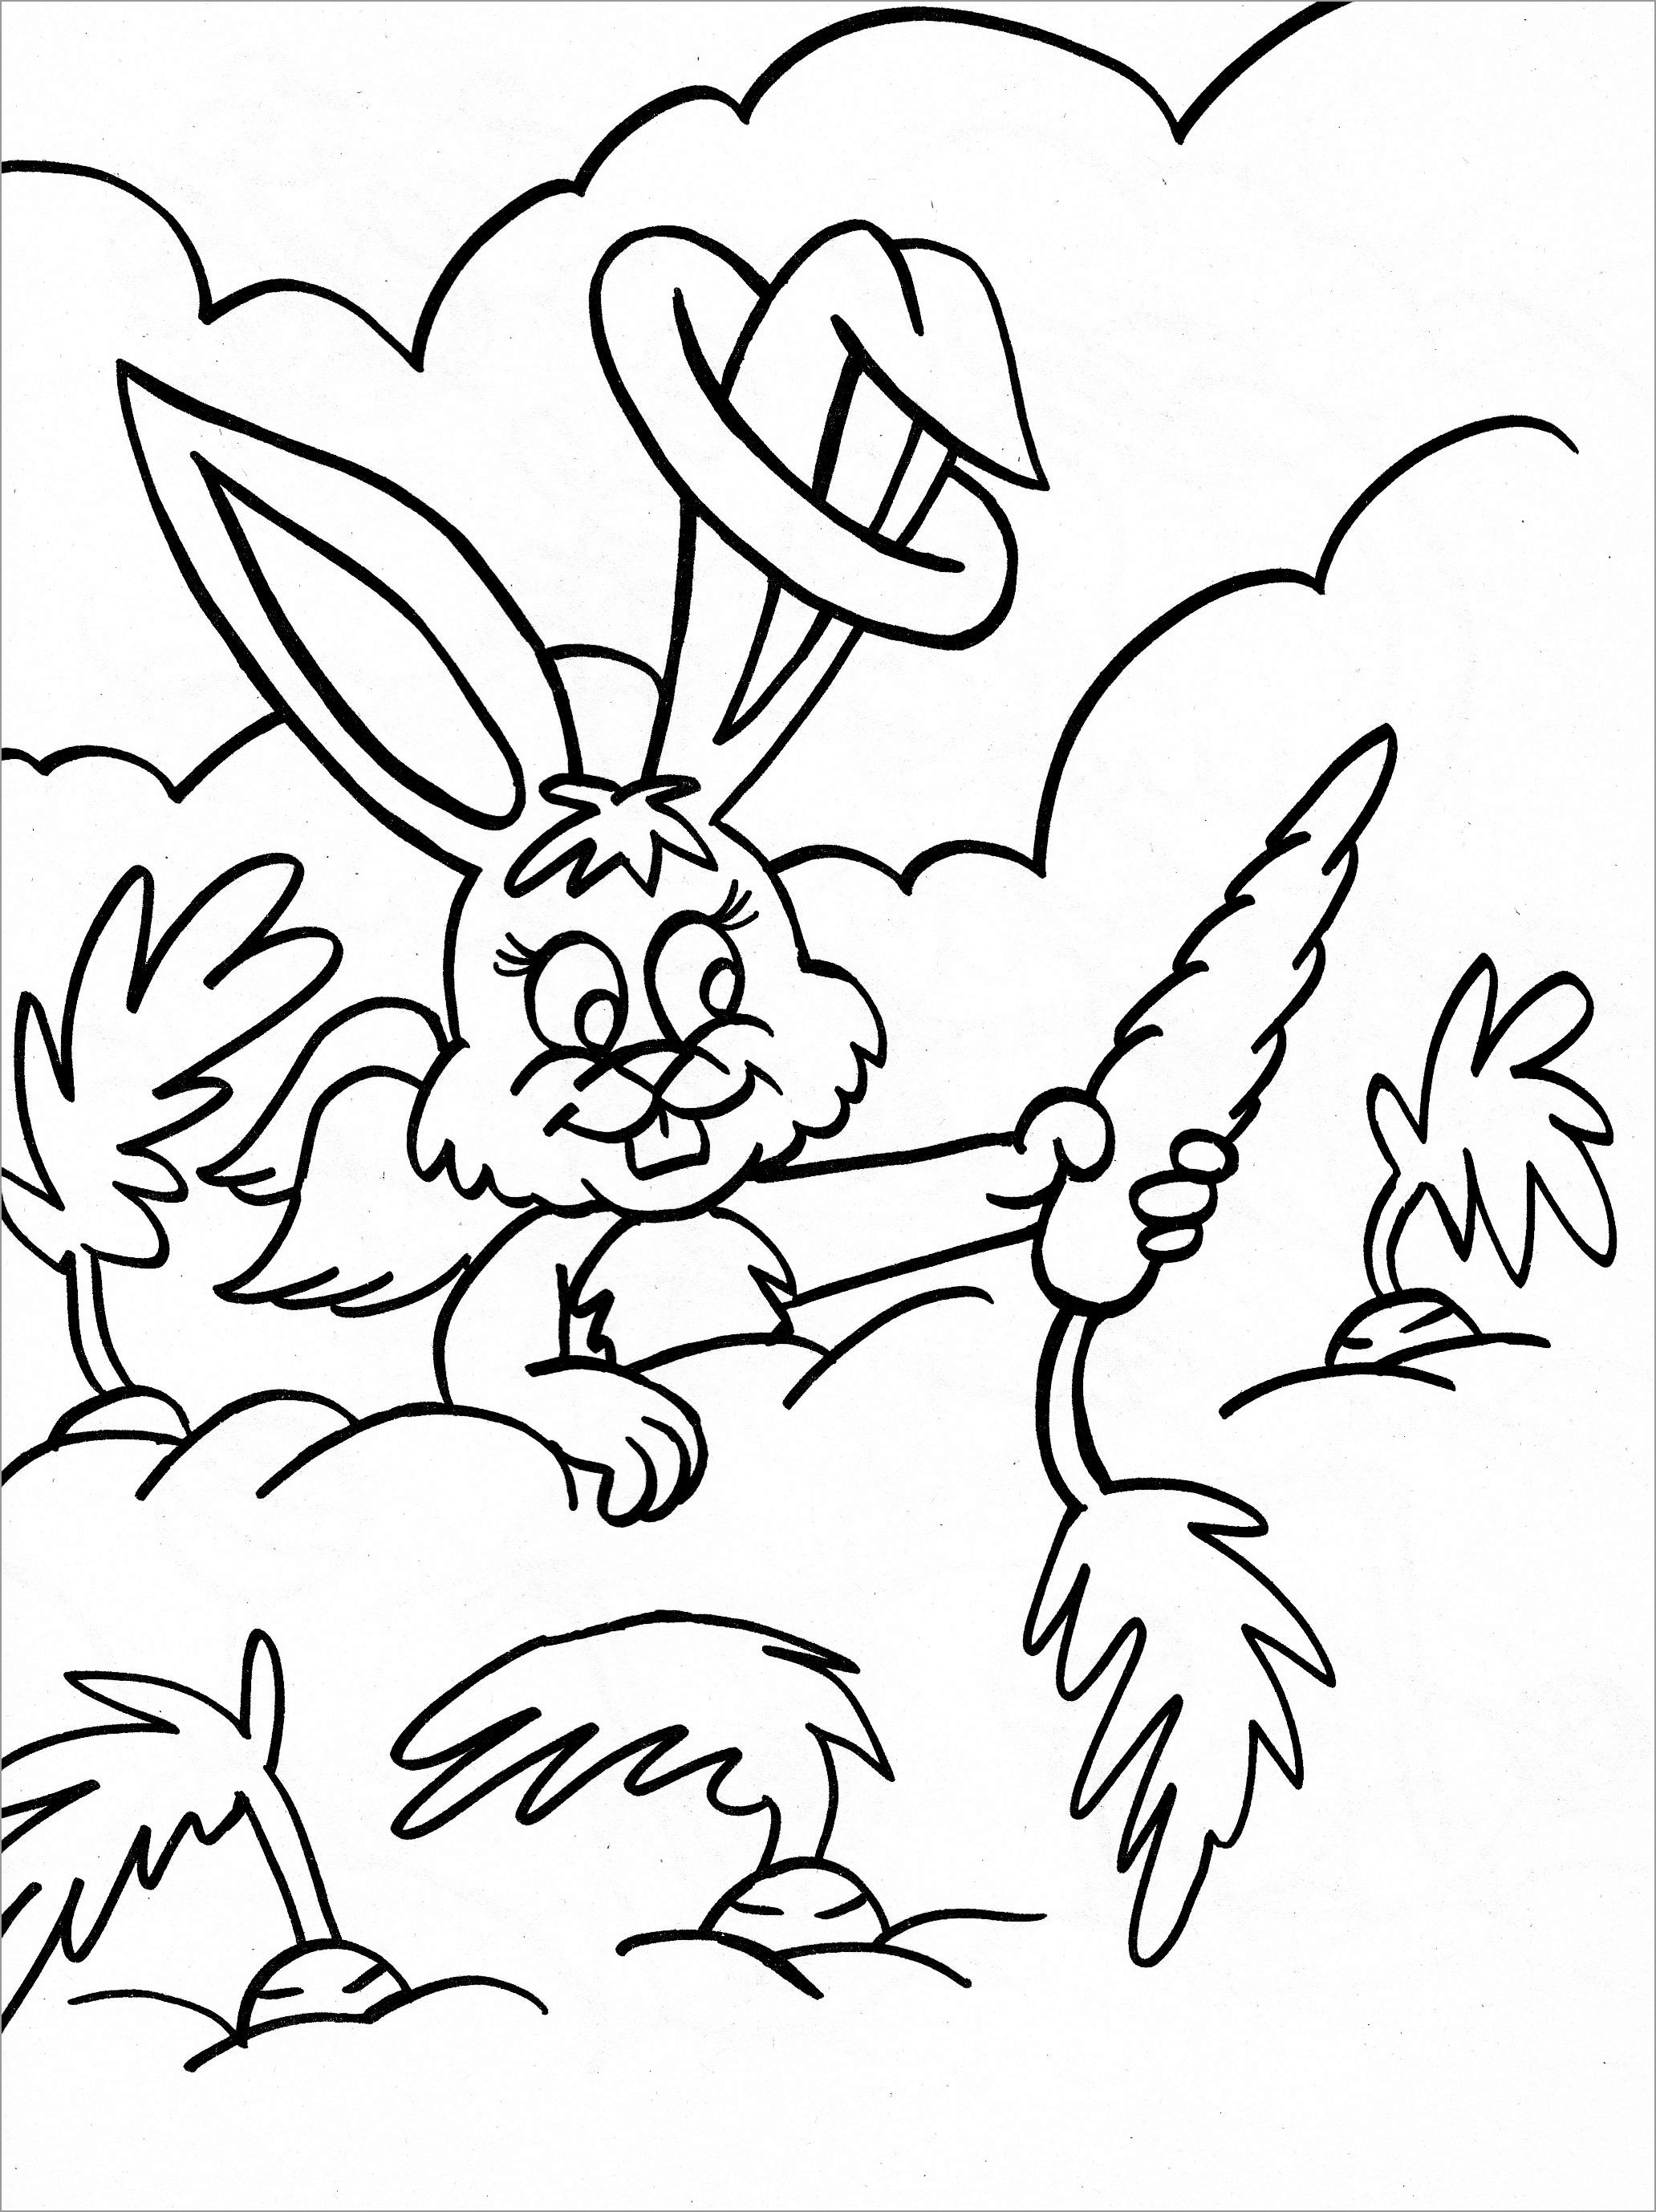 Carrot and Rabbit Coloring Page